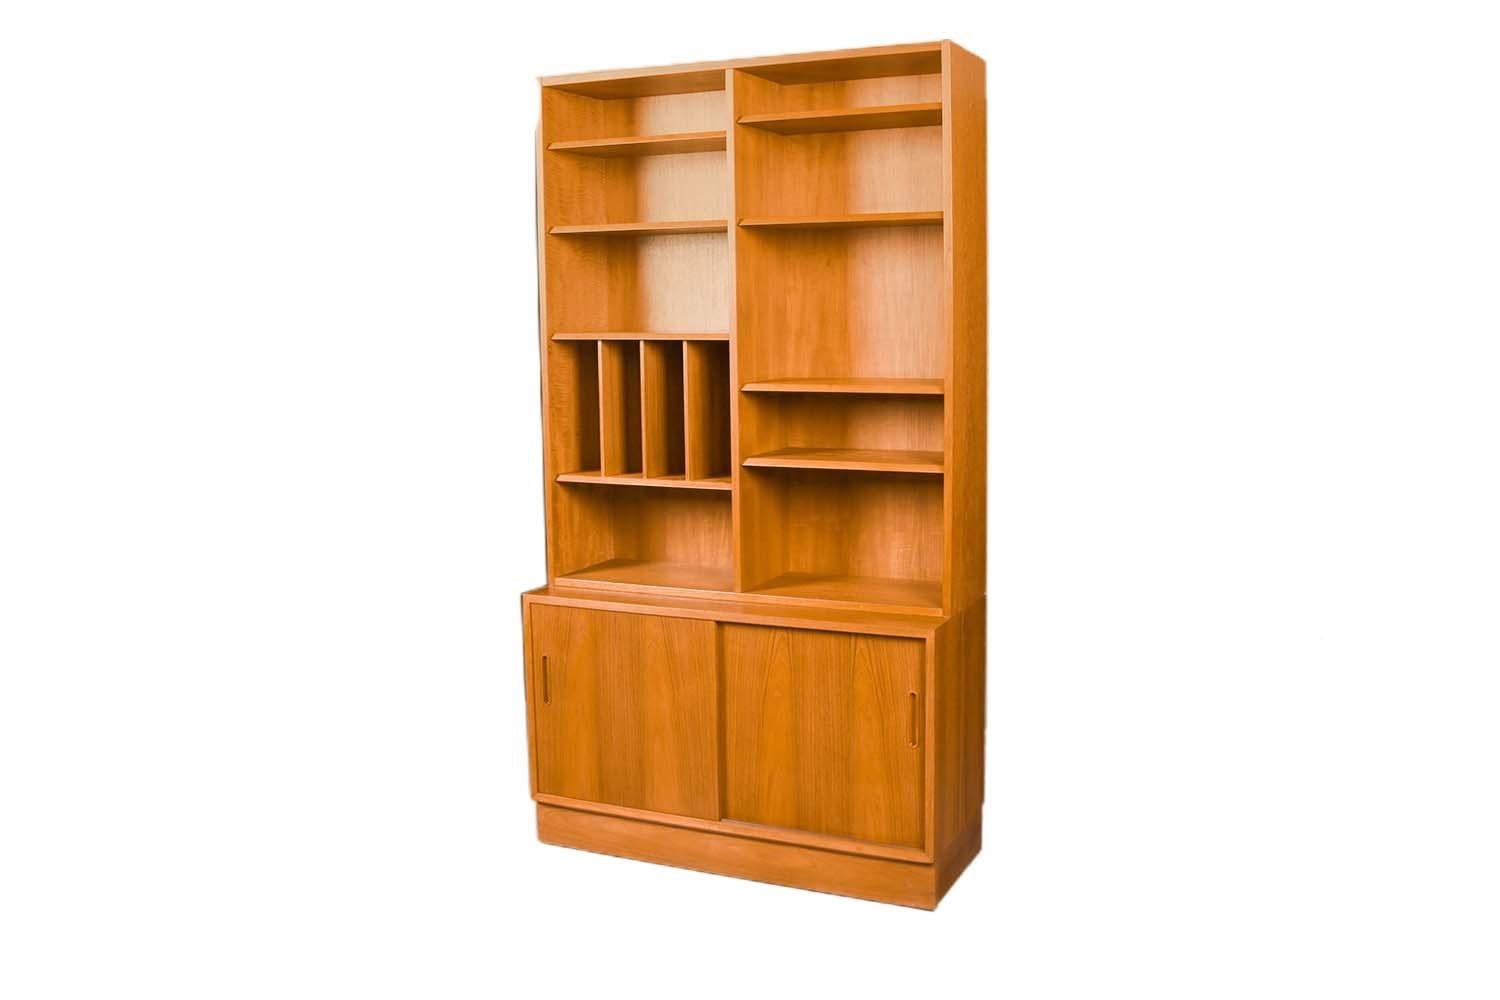 Fantastic Danish teak storage cabinet/ hutch by designer Poul Hundevad. This amazing vintage teak veneer storage cabinet/hutch features a two-piece hutch resting on a credenza base made in Denmark by designer Poul Hundevad. A beautiful Danish Modern